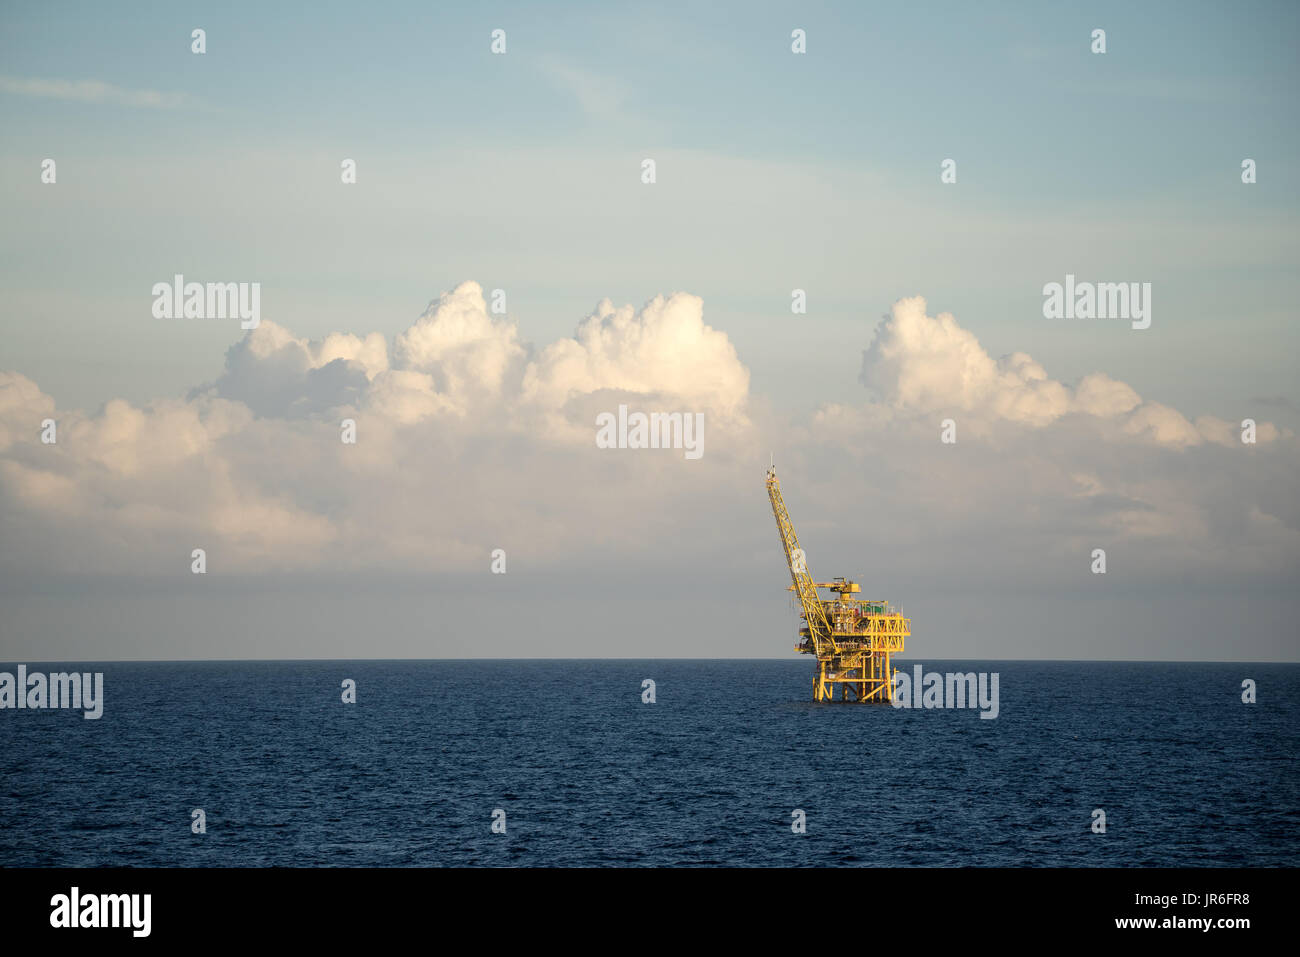 Offshore oil processing platform at sea Stock Photo